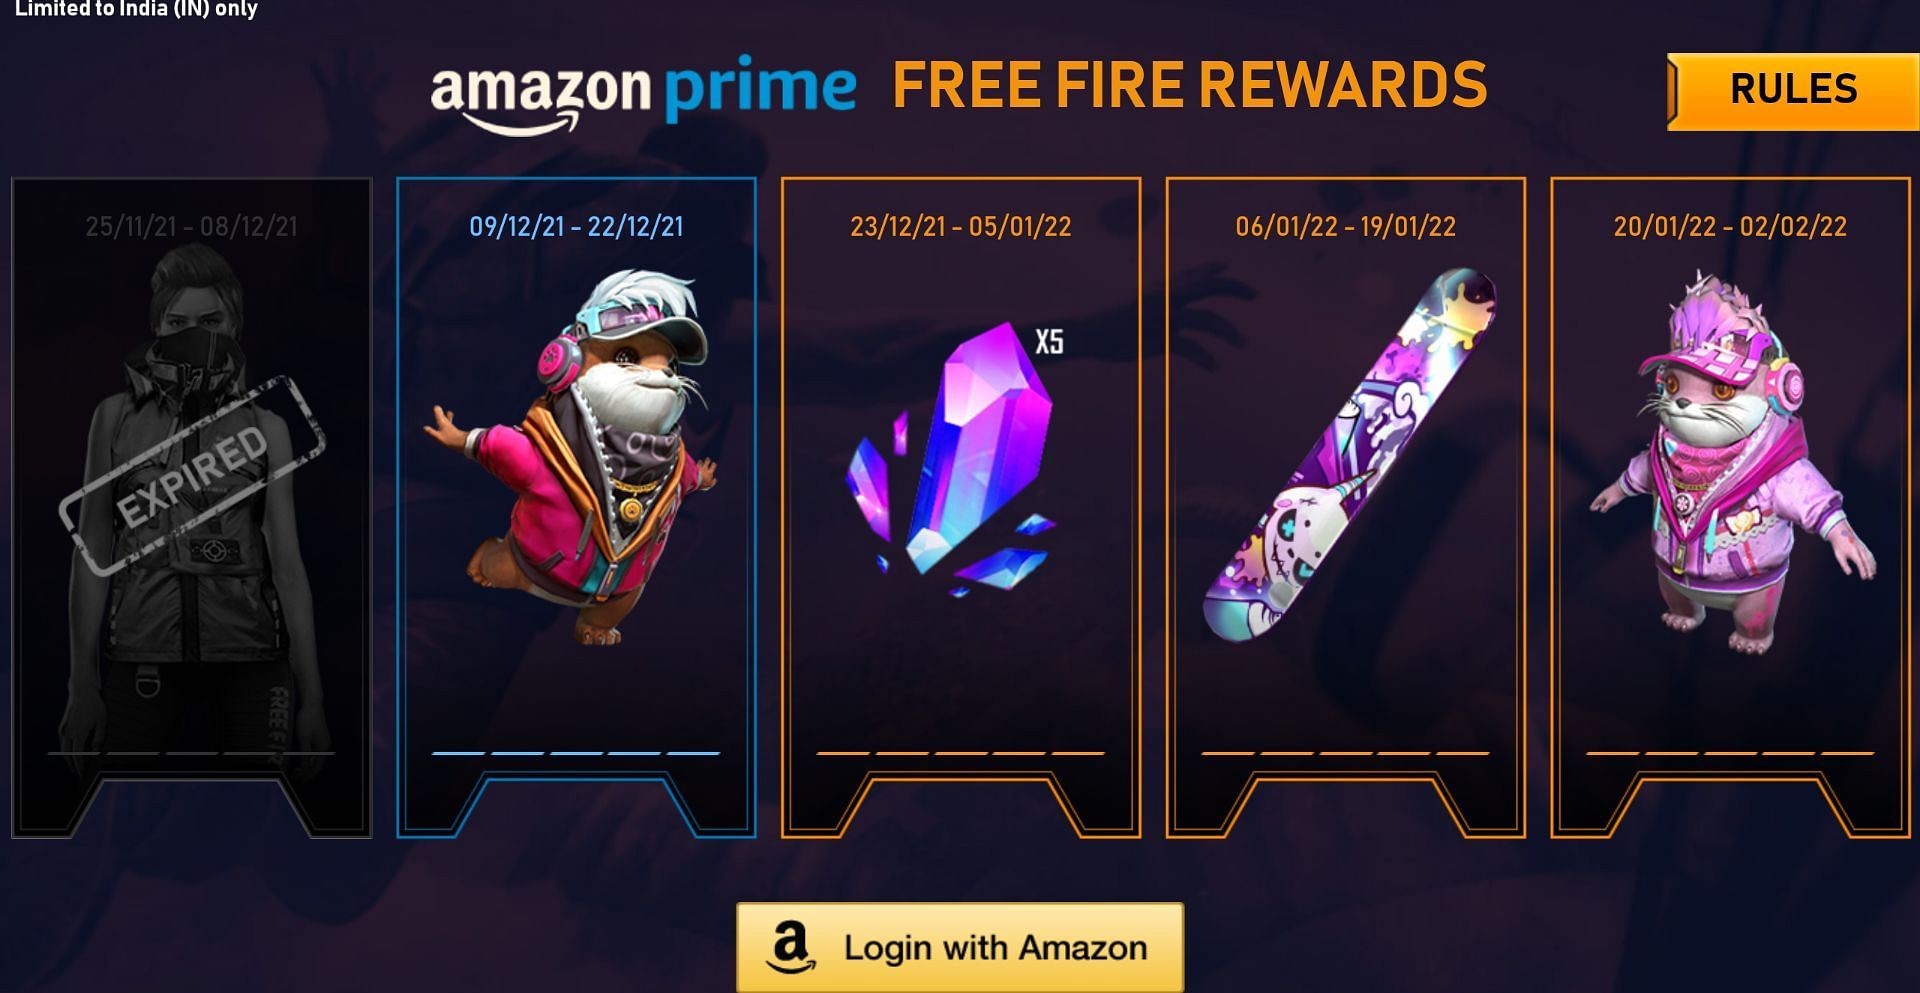 Login with Amazon to collect the items (Image via Free Fire)